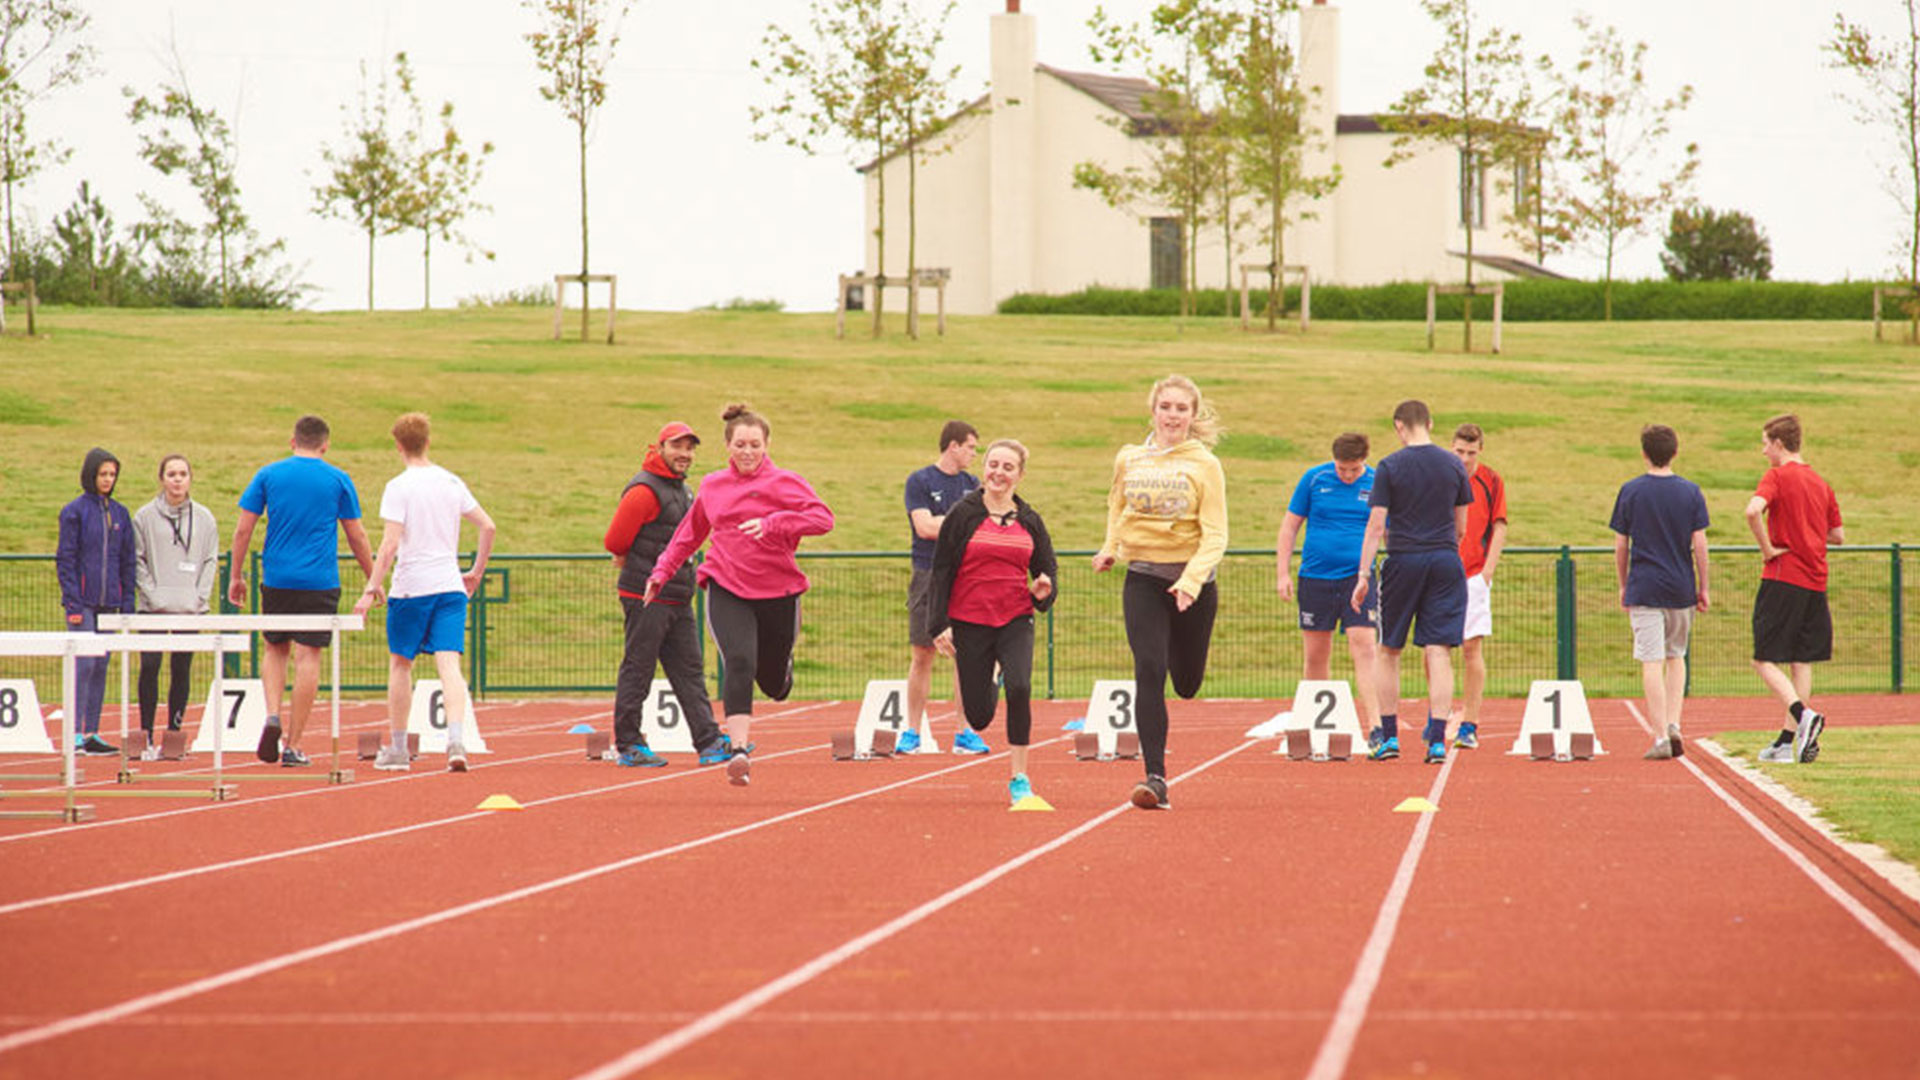 Students exercising on the running track